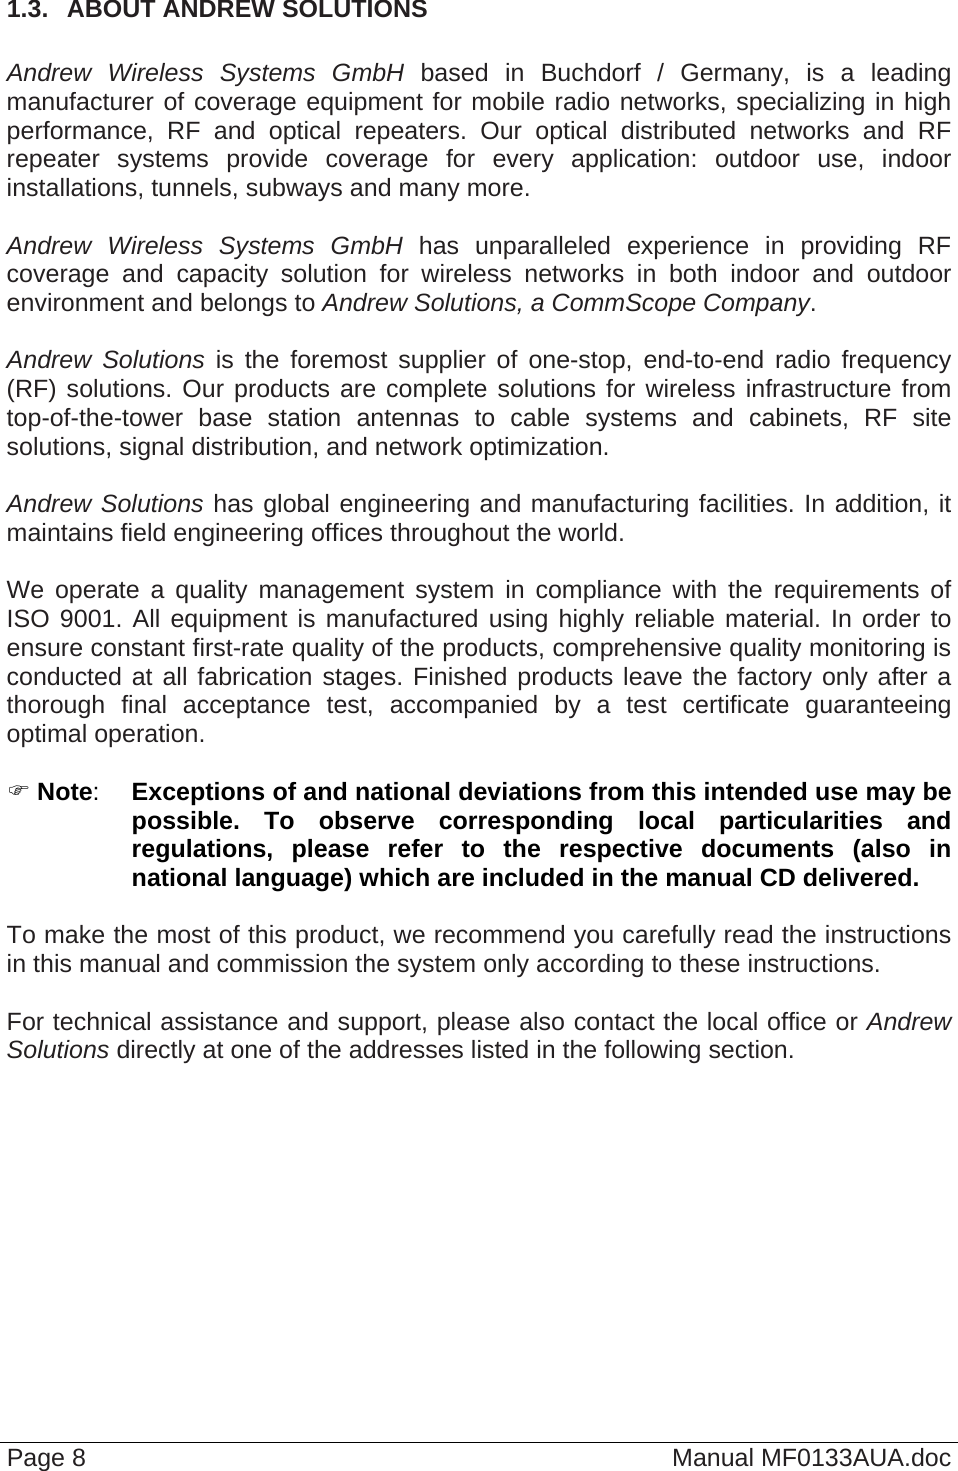  Page 8  Manual MF0133AUA.doc 1.3.  ABOUT ANDREW SOLUTIONS   Andrew Wireless Systems GmbH based in Buchdorf / Germany, is a leading manufacturer of coverage equipment for mobile radio networks, specializing in high performance, RF and optical repeaters. Our optical distributed networks and RF repeater systems provide coverage for every application: outdoor use, indoor installations, tunnels, subways and many more.  Andrew Wireless Systems GmbH has unparalleled experience in providing RF coverage and capacity solution for wireless networks in both indoor and outdoor environment and belongs to Andrew Solutions, a CommScope Company.  Andrew Solutions is the foremost supplier of one-stop, end-to-end radio frequency (RF) solutions. Our products are complete solutions for wireless infrastructure from top-of-the-tower base station antennas to cable systems and cabinets, RF site solutions, signal distribution, and network optimization.  Andrew Solutions has global engineering and manufacturing facilities. In addition, it maintains field engineering offices throughout the world.  We operate a quality management system in compliance with the requirements of ISO 9001. All equipment is manufactured using highly reliable material. In order to ensure constant first-rate quality of the products, comprehensive quality monitoring is conducted at all fabrication stages. Finished products leave the factory only after a thorough final acceptance test, accompanied by a test certificate guaranteeing optimal operation.   Note:  Exceptions of and national deviations from this intended use may be possible. To observe corresponding local particularities and regulations, please refer to the respective documents (also in national language) which are included in the manual CD delivered.  To make the most of this product, we recommend you carefully read the instructions in this manual and commission the system only according to these instructions.   For technical assistance and support, please also contact the local office or Andrew Solutions directly at one of the addresses listed in the following section.  